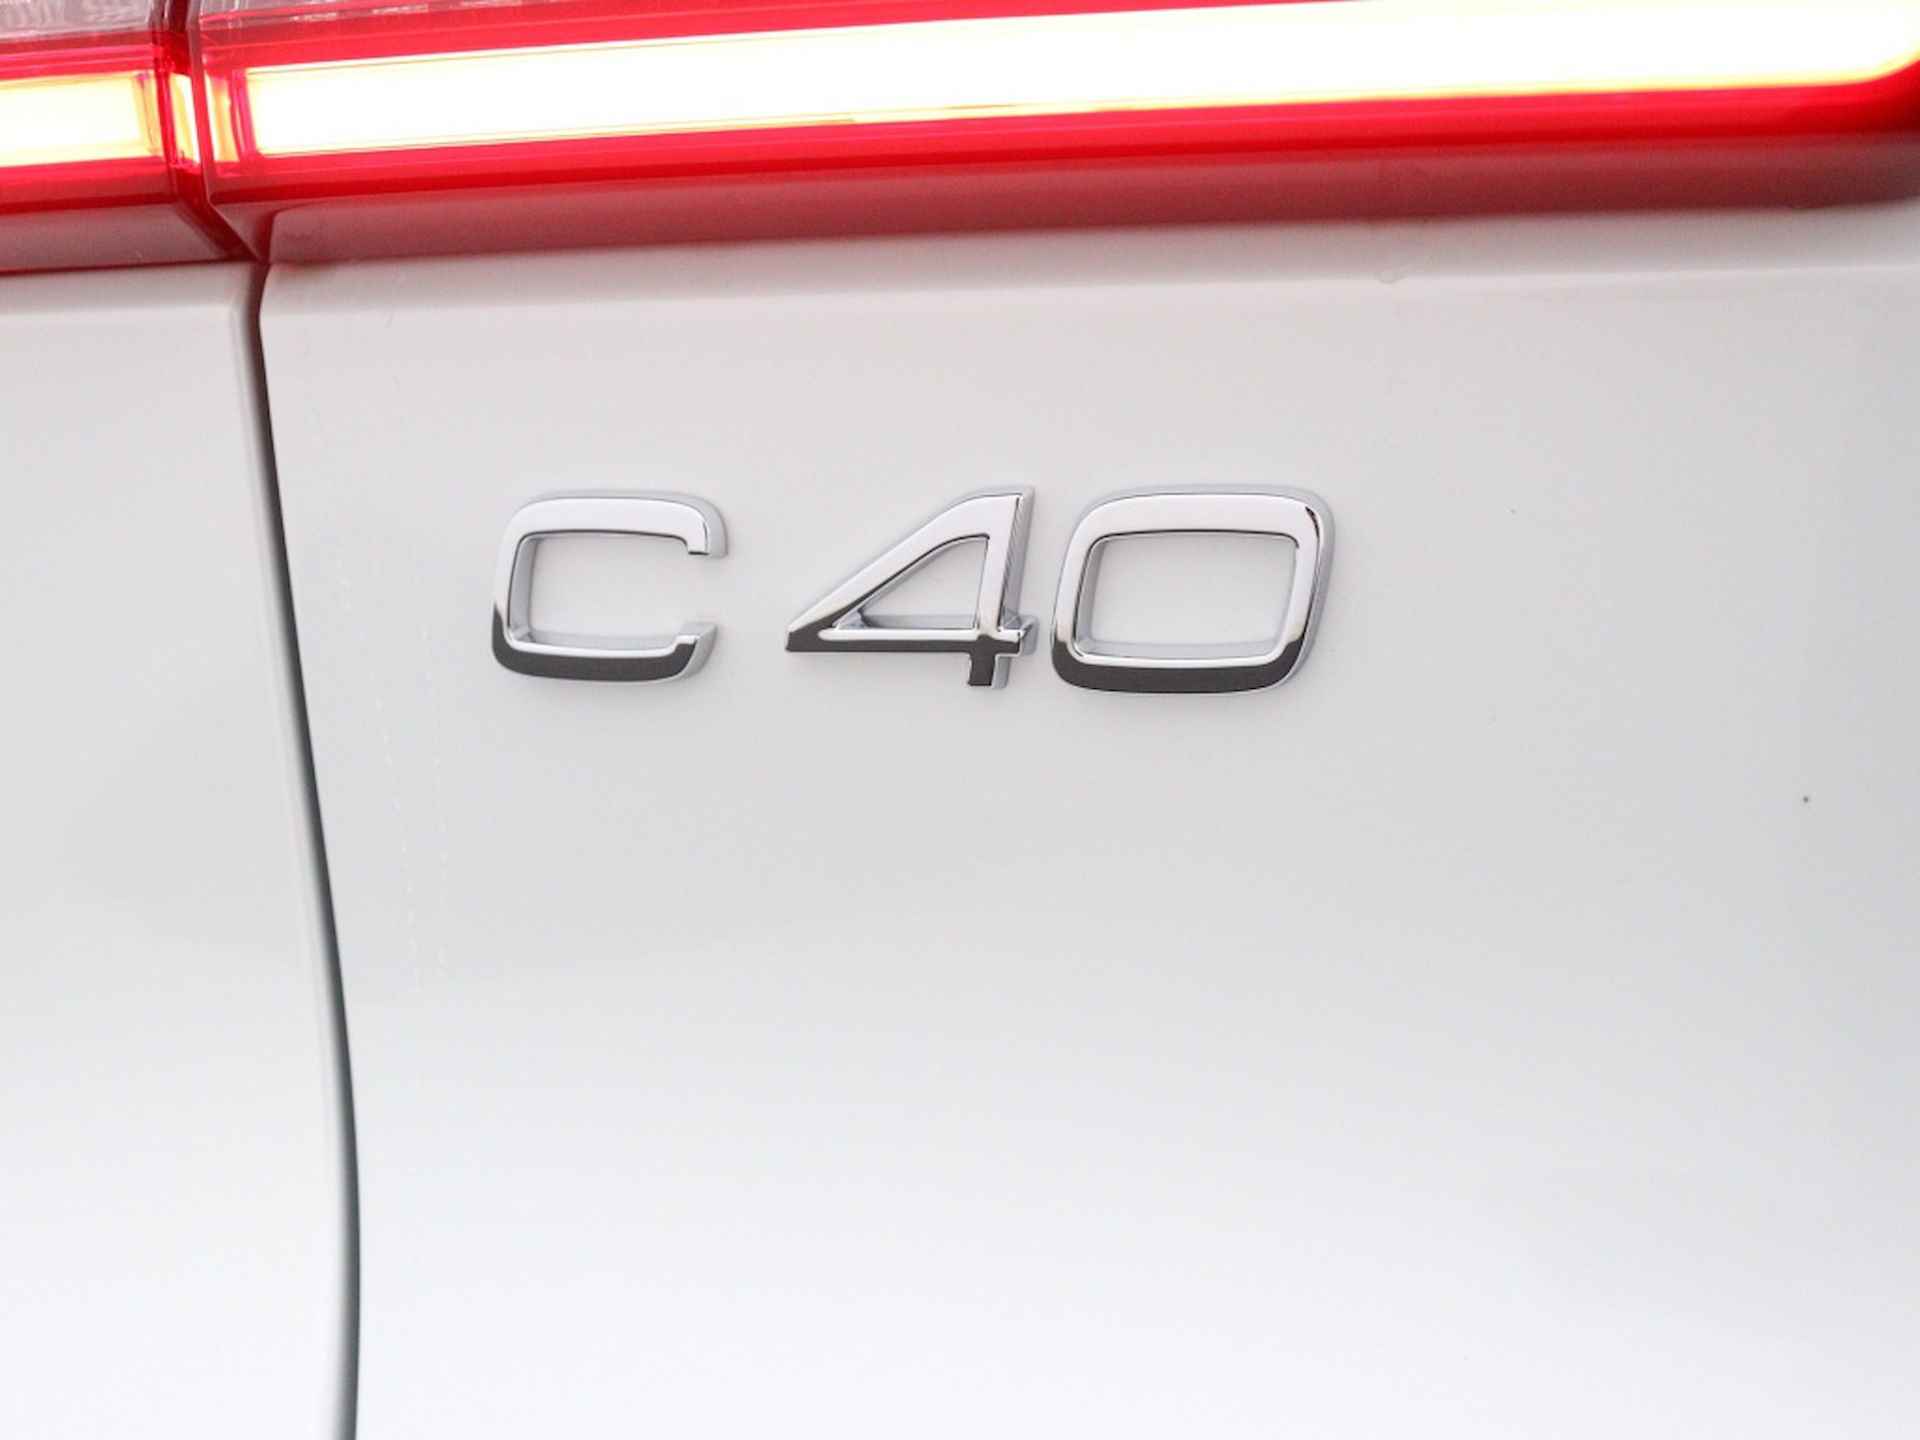 Volvo C40 Extended Plus 82 kWh - 44/47